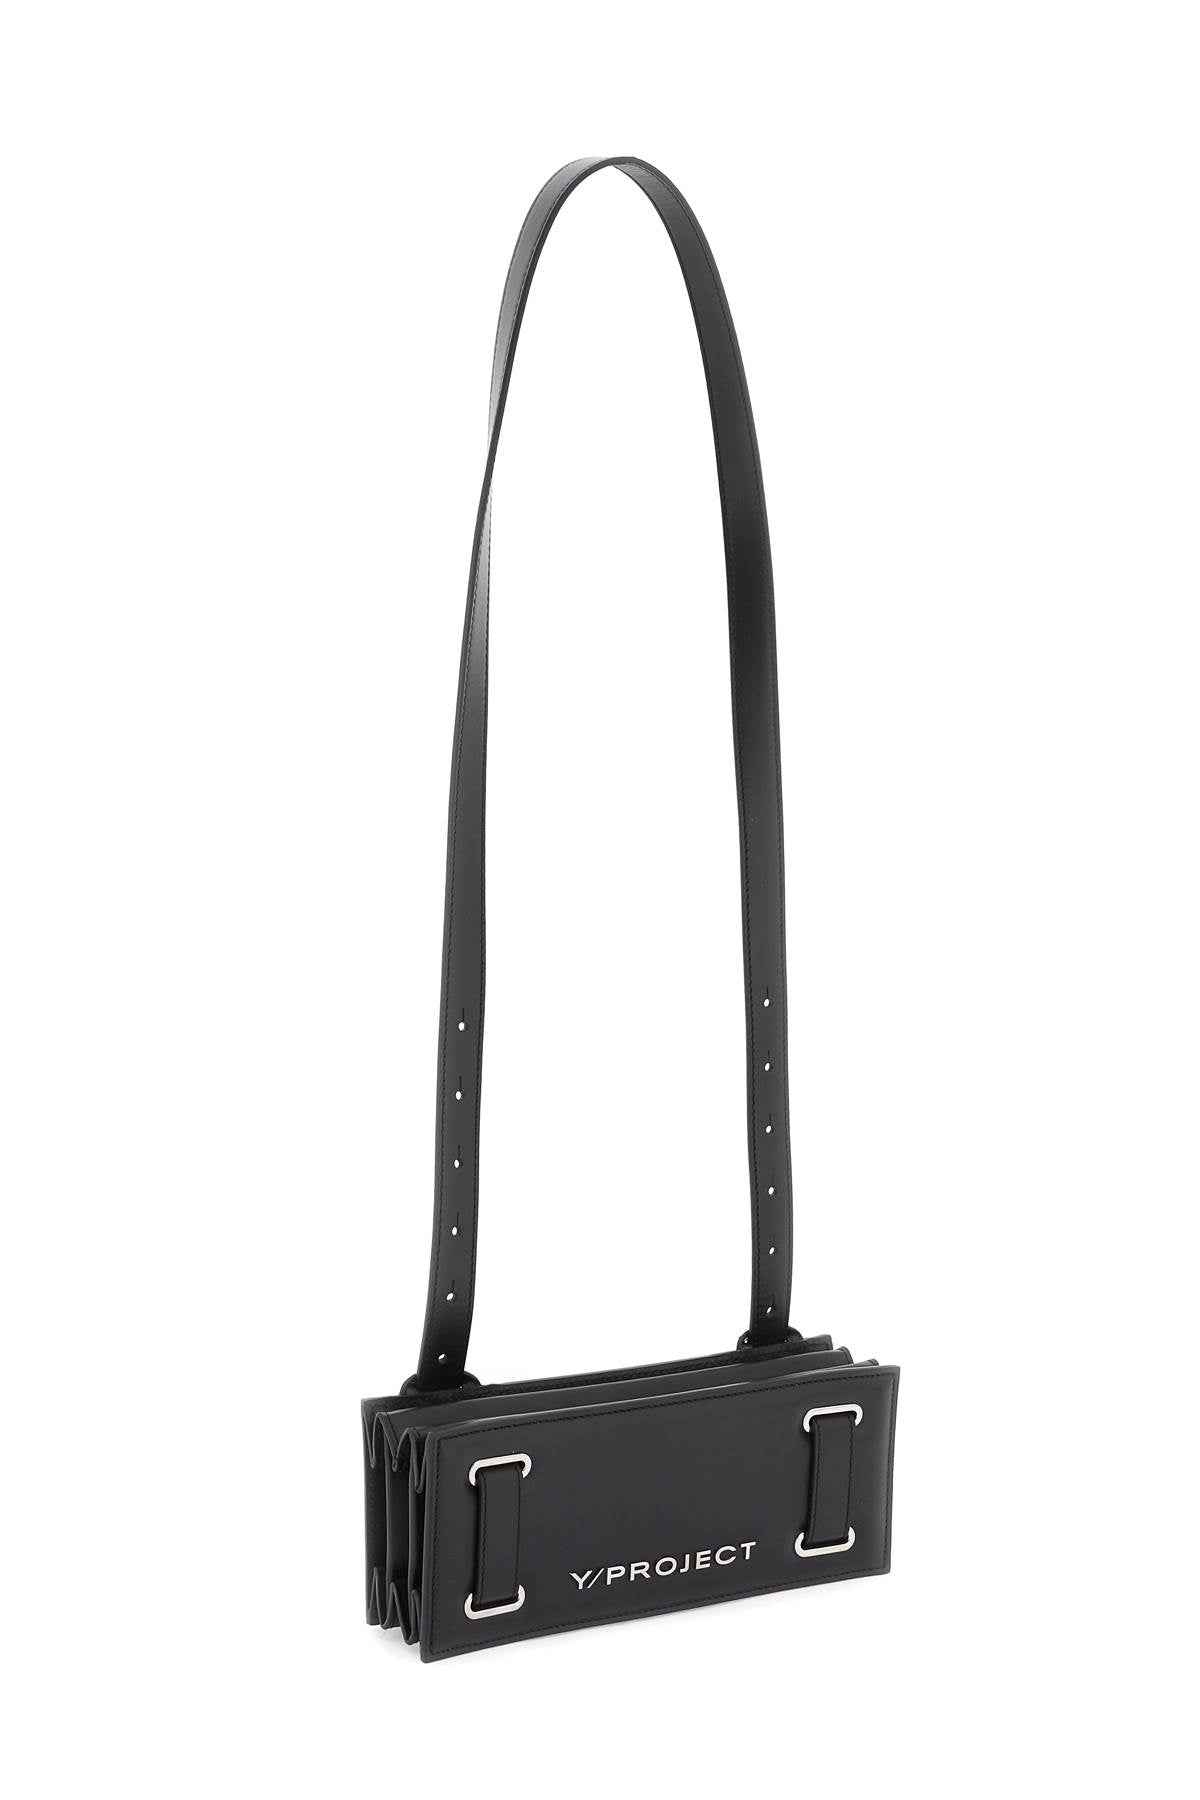 Y/PROJECT Mini Accordian Leather Crossbody Bag in Black with Adjustable Strap and Silver Accents